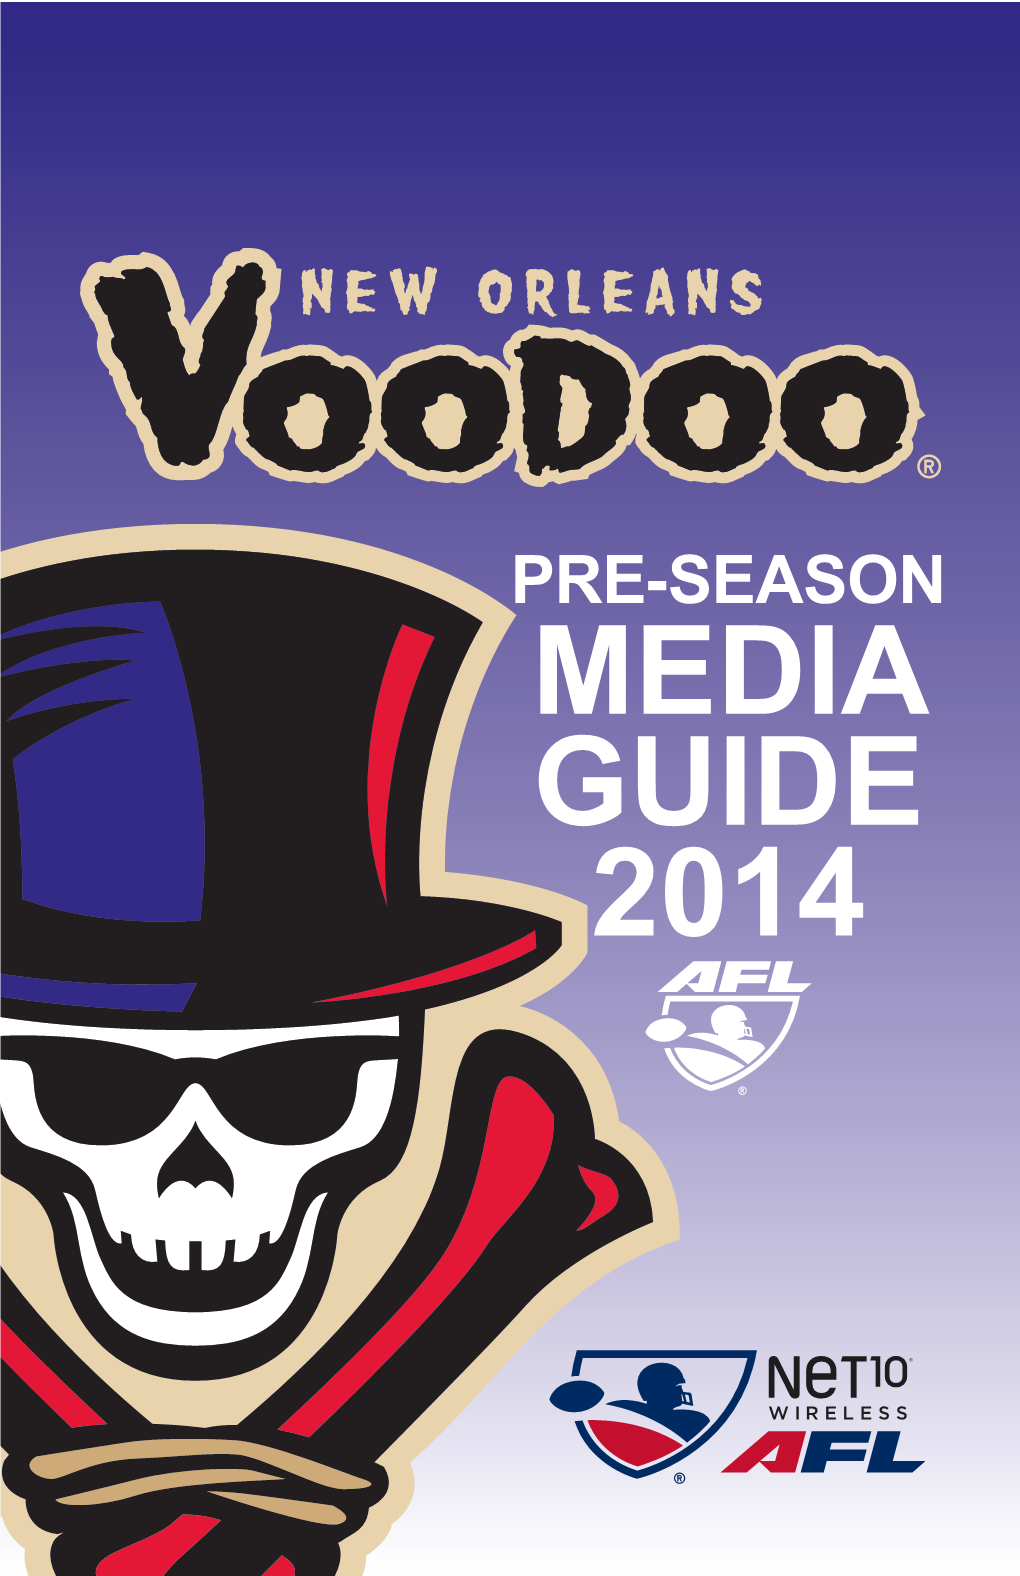 2014 New Orleans Voodoo Media Guide Is a Production of Louisiana Arena Football, LLC